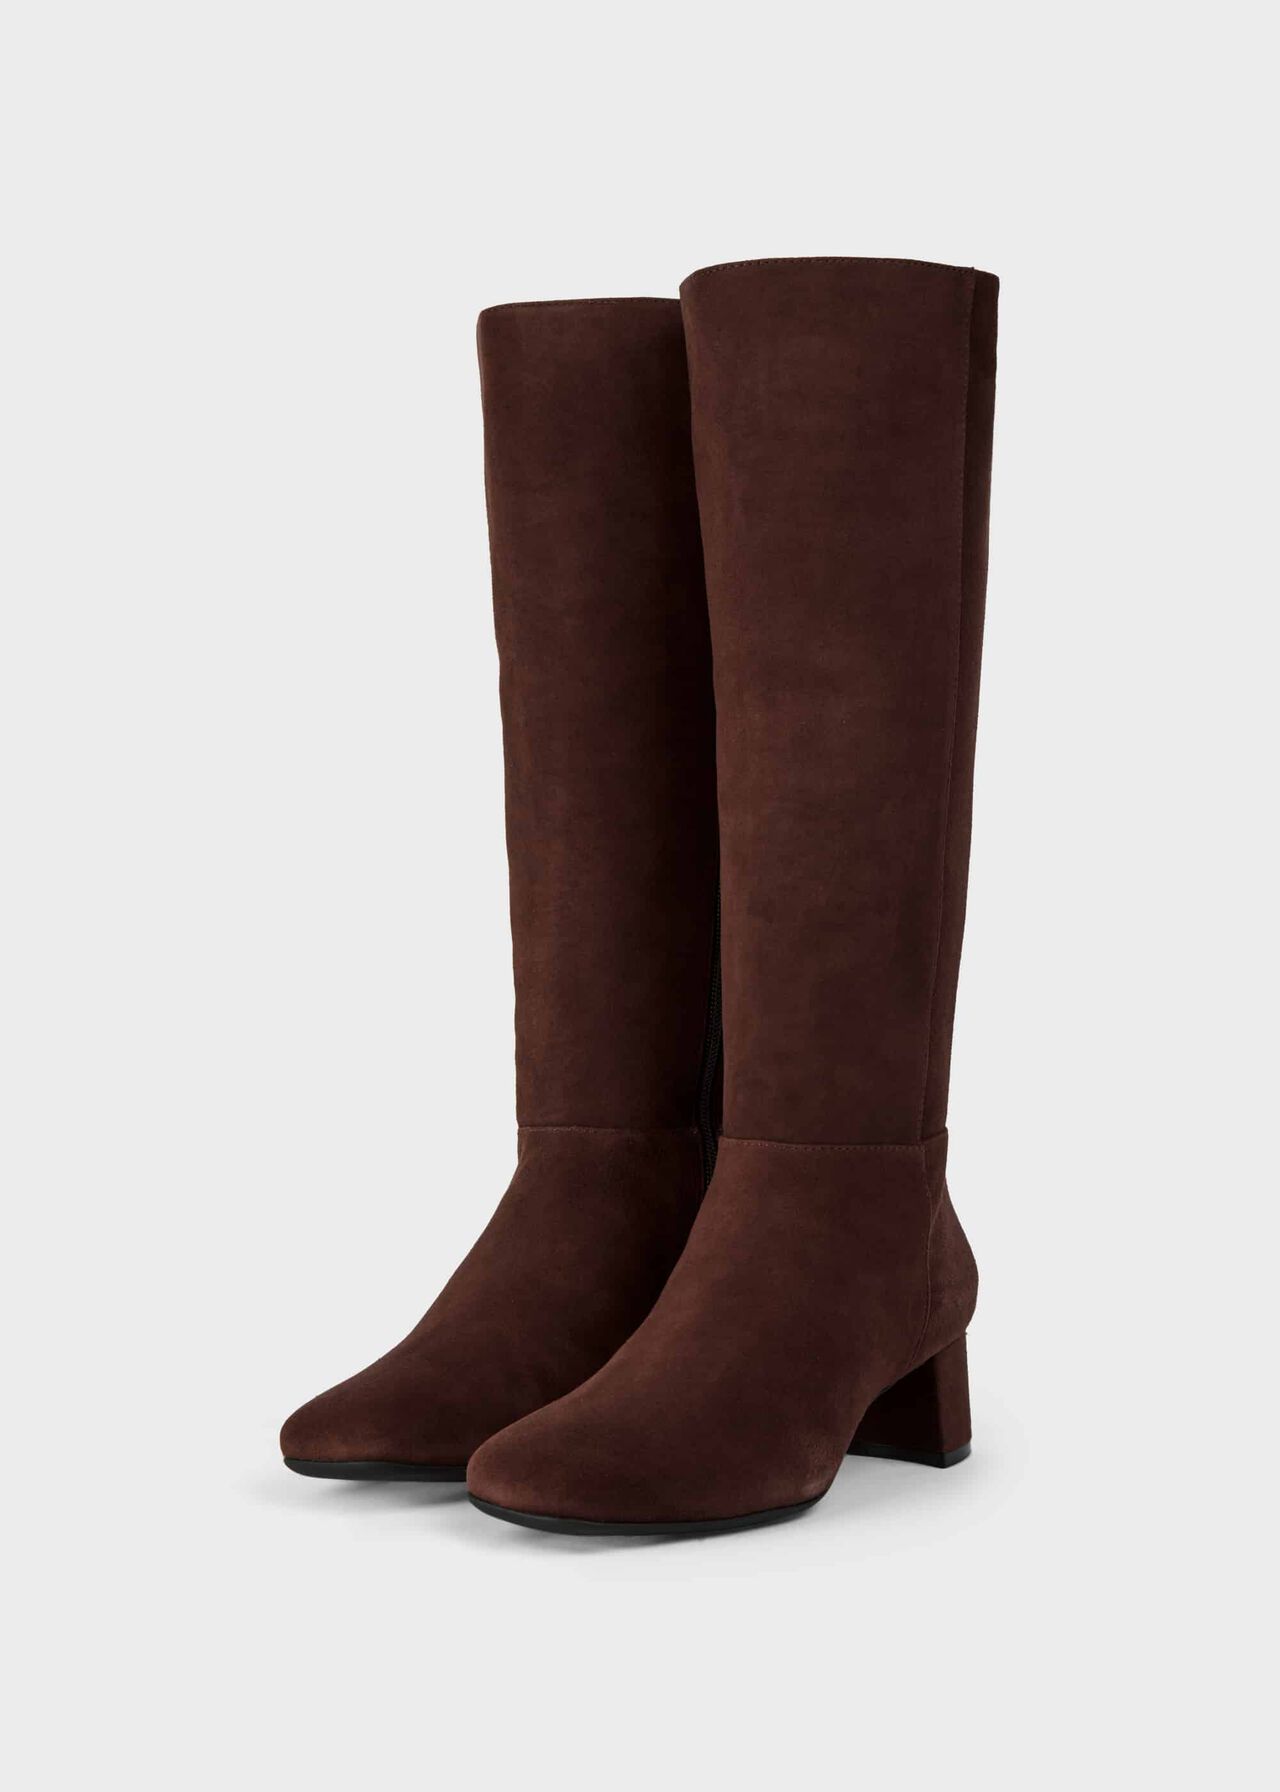 Hailey Flexi Knee Boots, Chocolate, hi-res